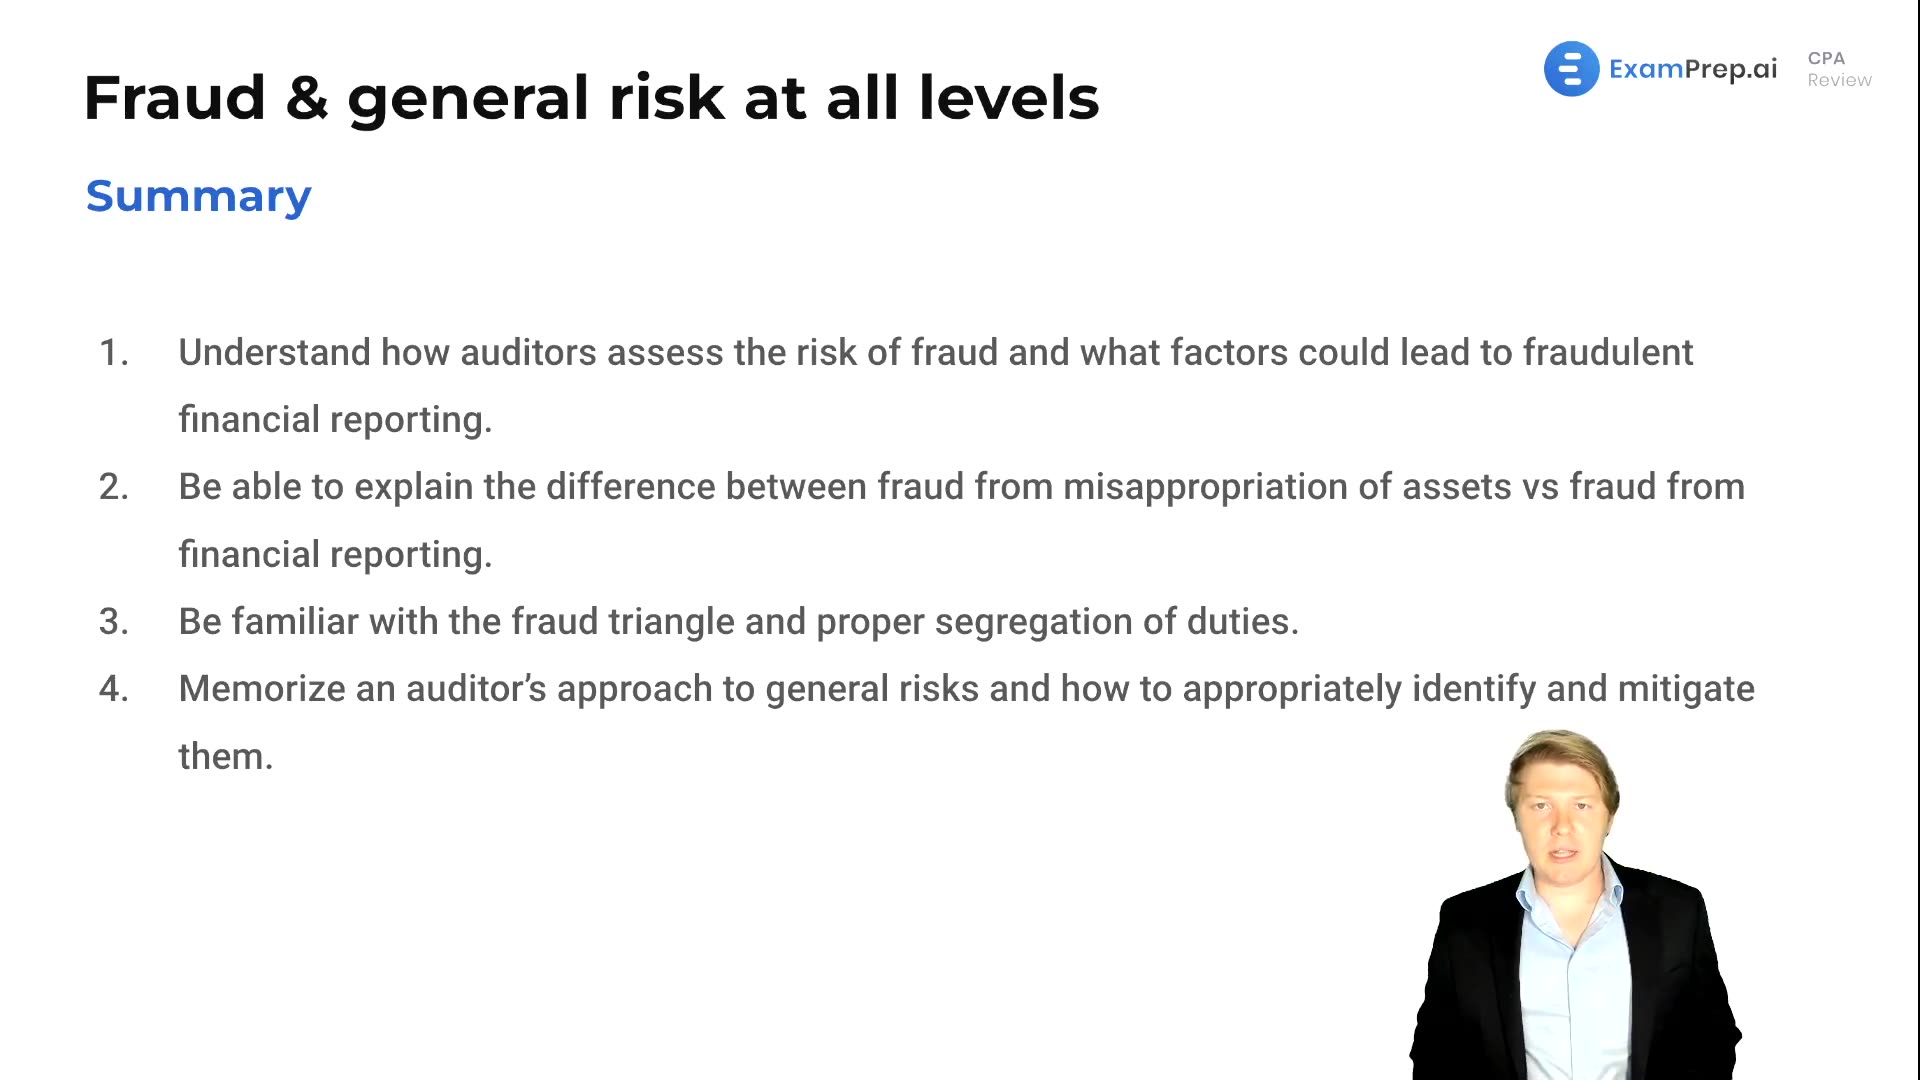 Fraud & General Risk at All Levels Summary lesson thumbnail